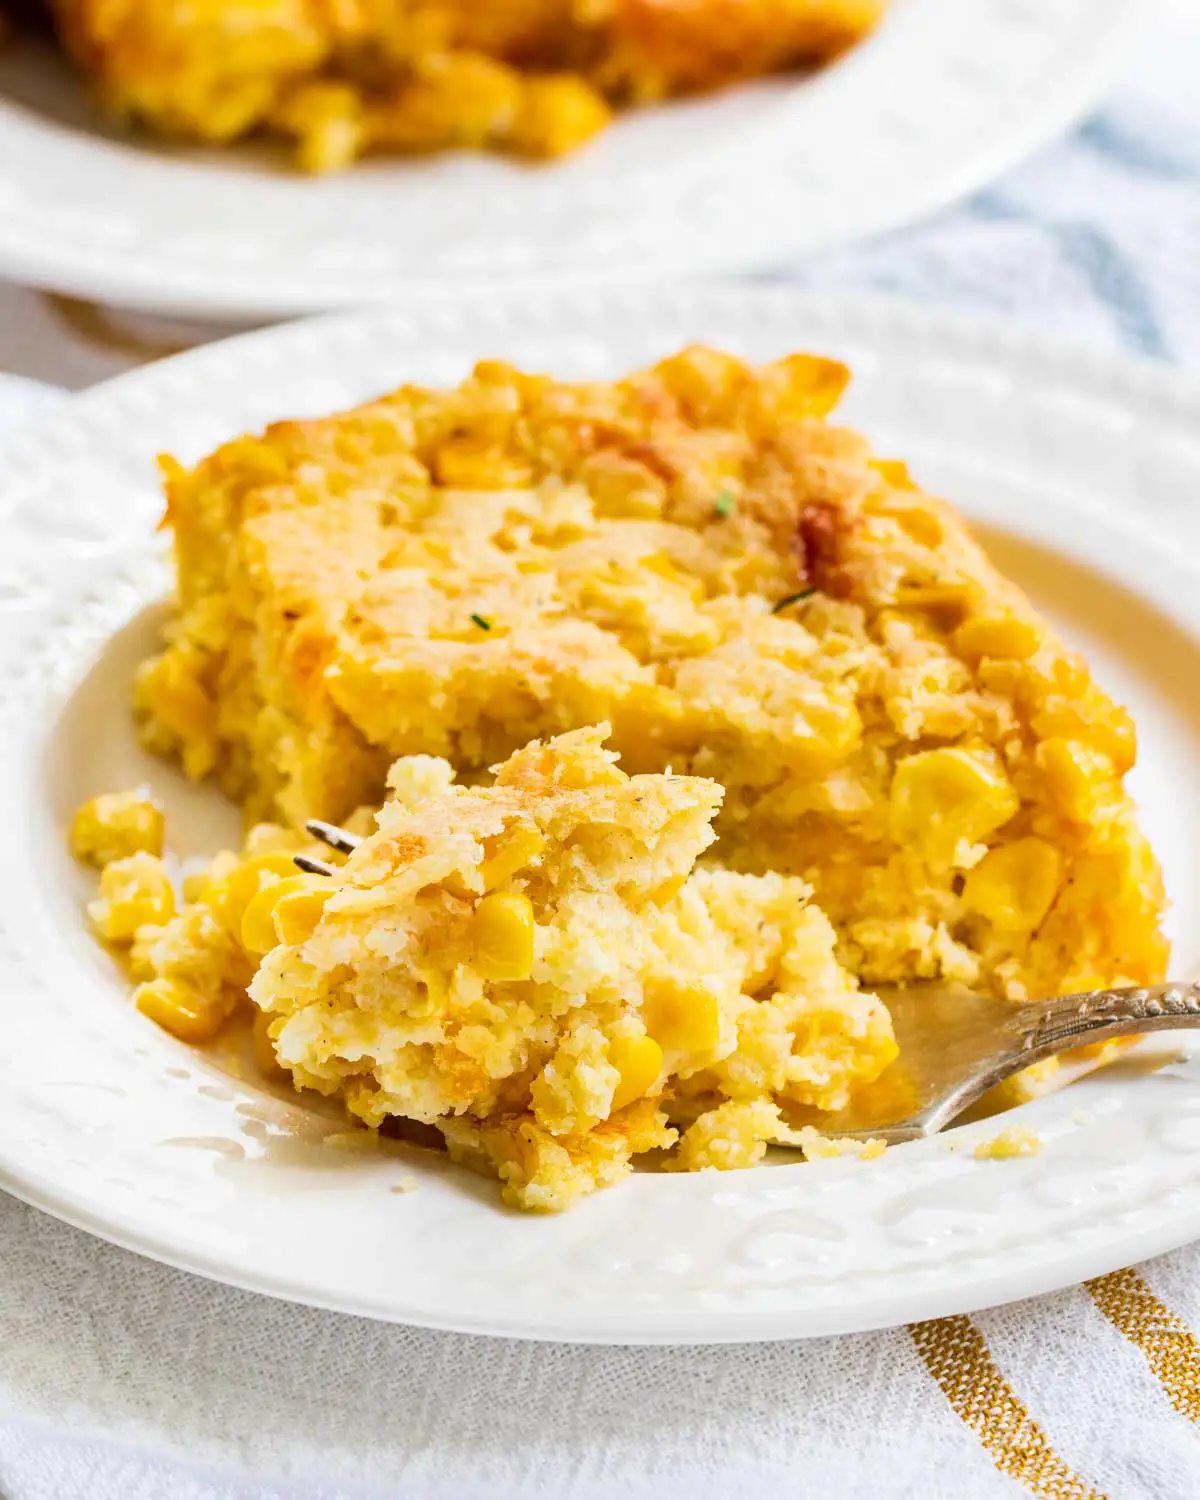 a slice of corn casserole on a plate with a fork.